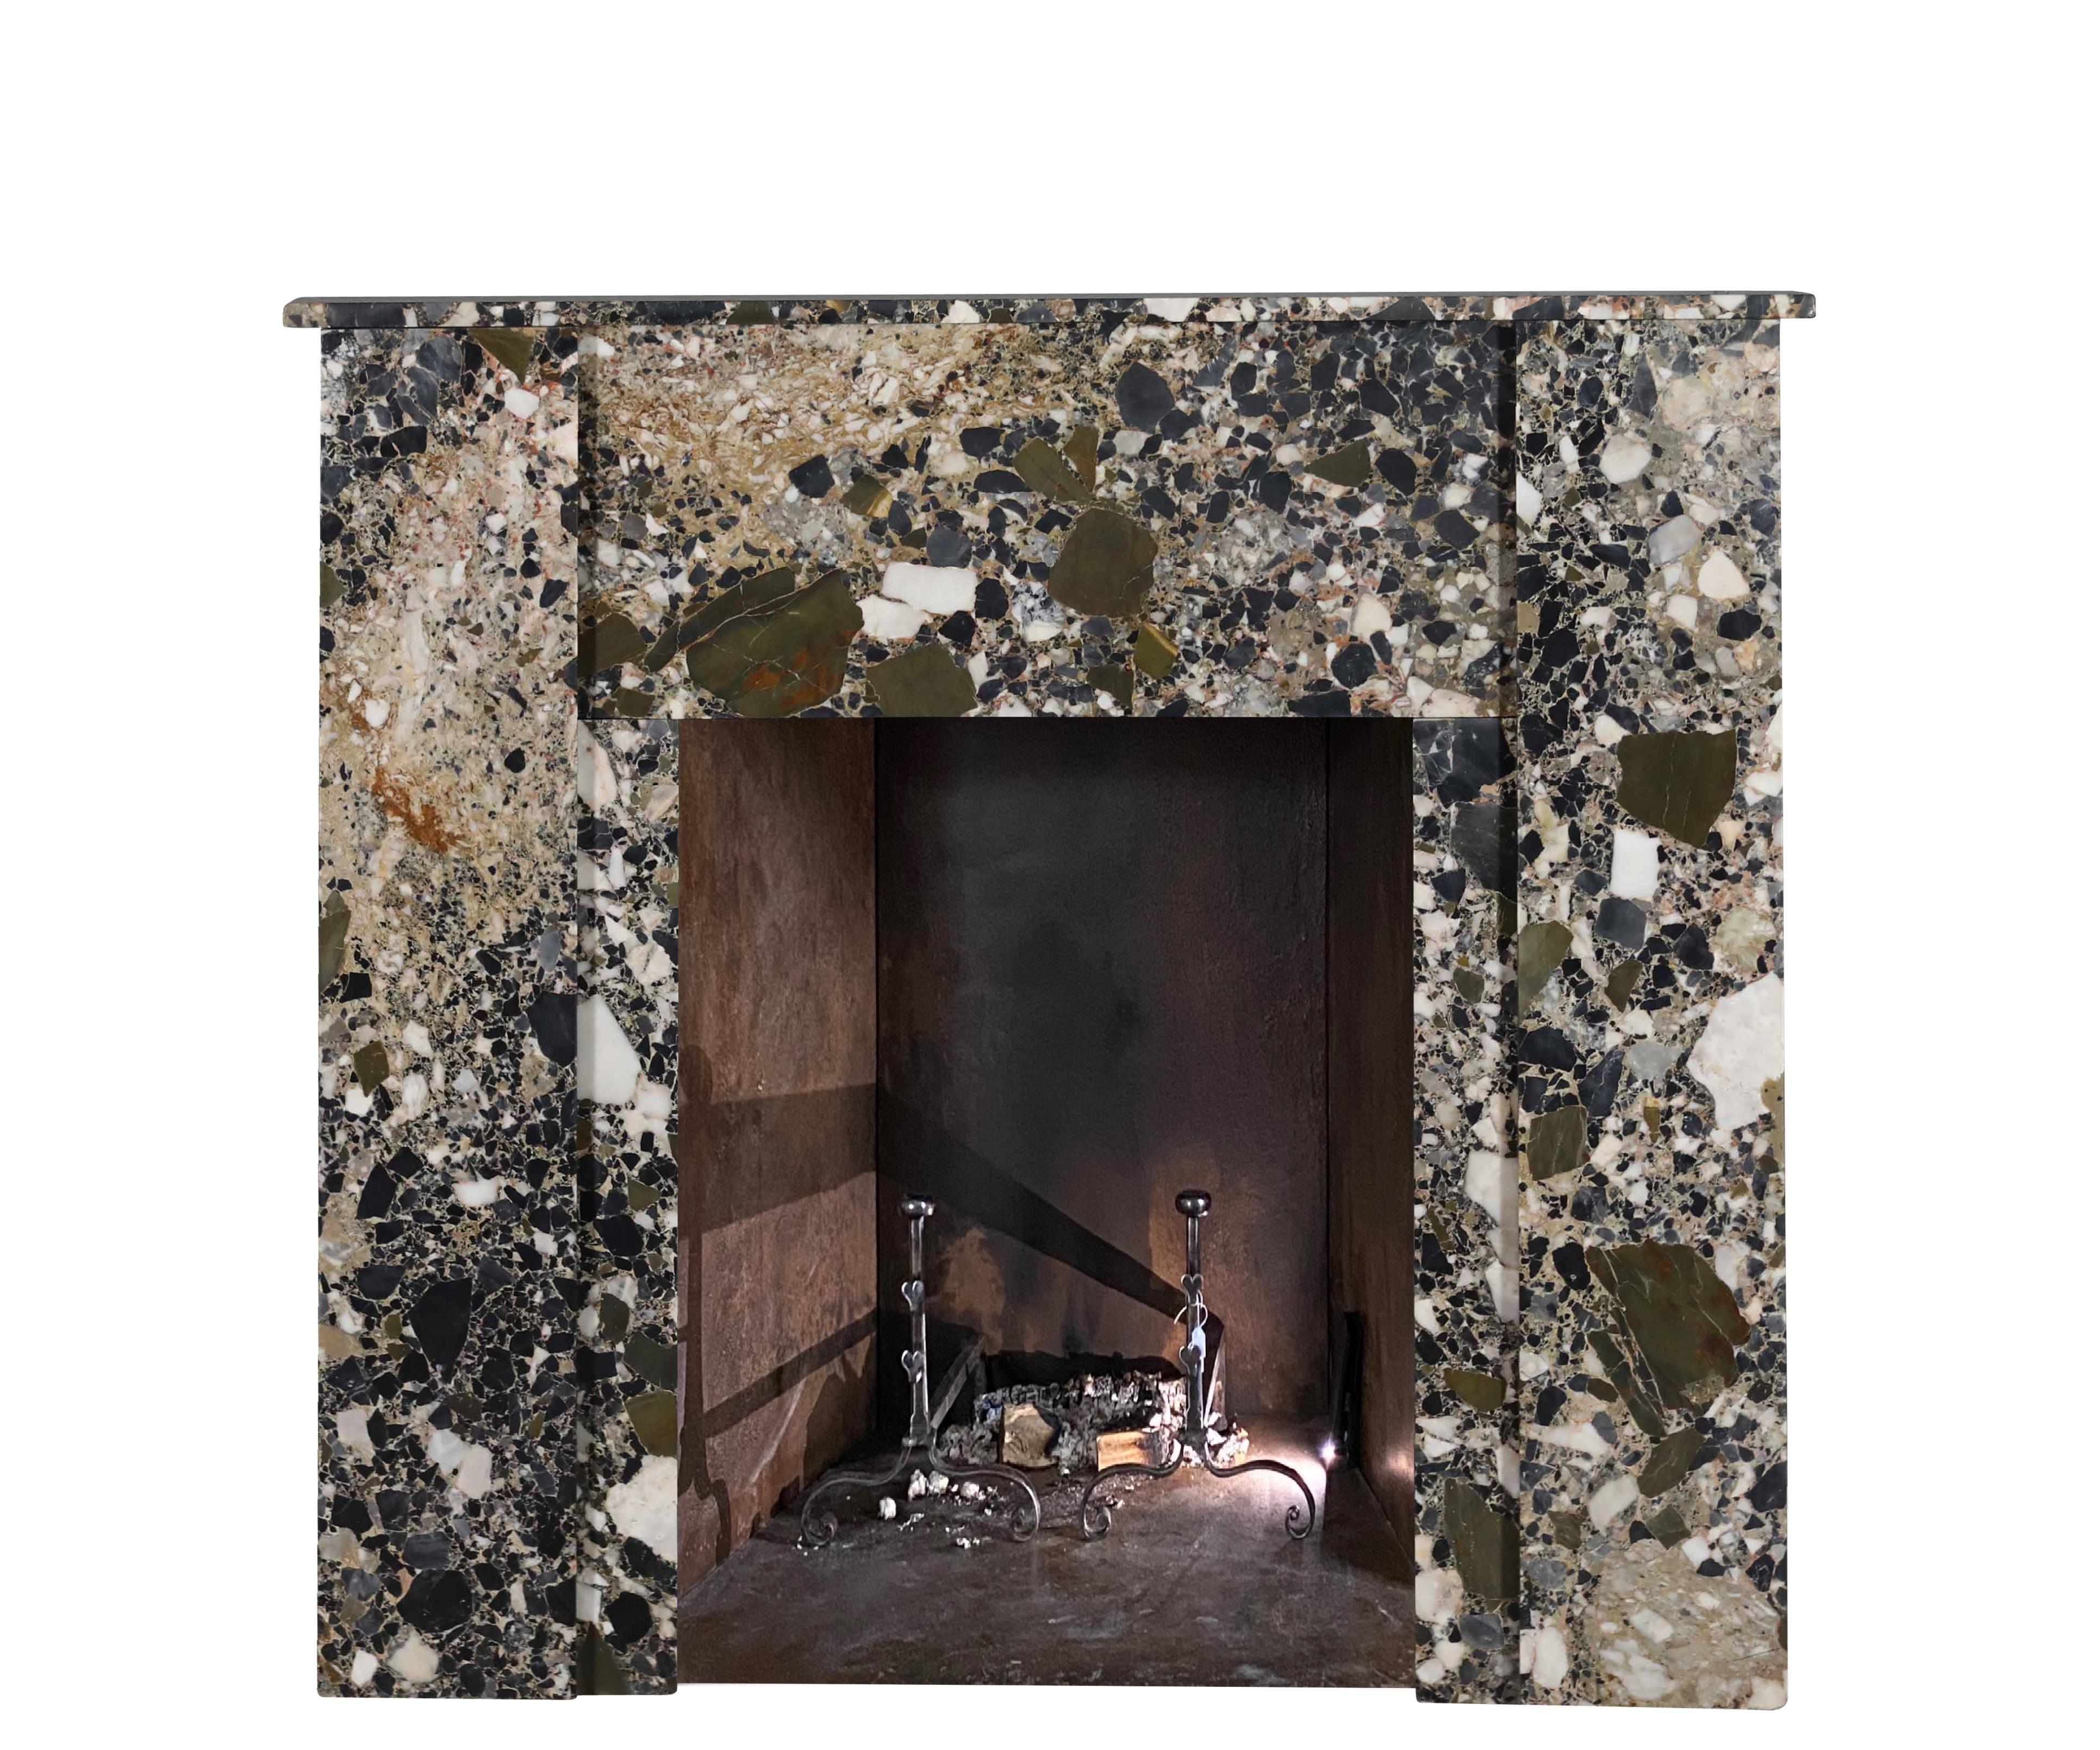 Exceptional Post-War vintage art-deco fireplace surround in a exquisite Breche Quality marble with terrazzo look.
Rich in color and pure minimalisme ready to install.
Measurements:
104,7 cm Exterior Width 41,22 Inch
96,5 cm Exterior Height 37,99